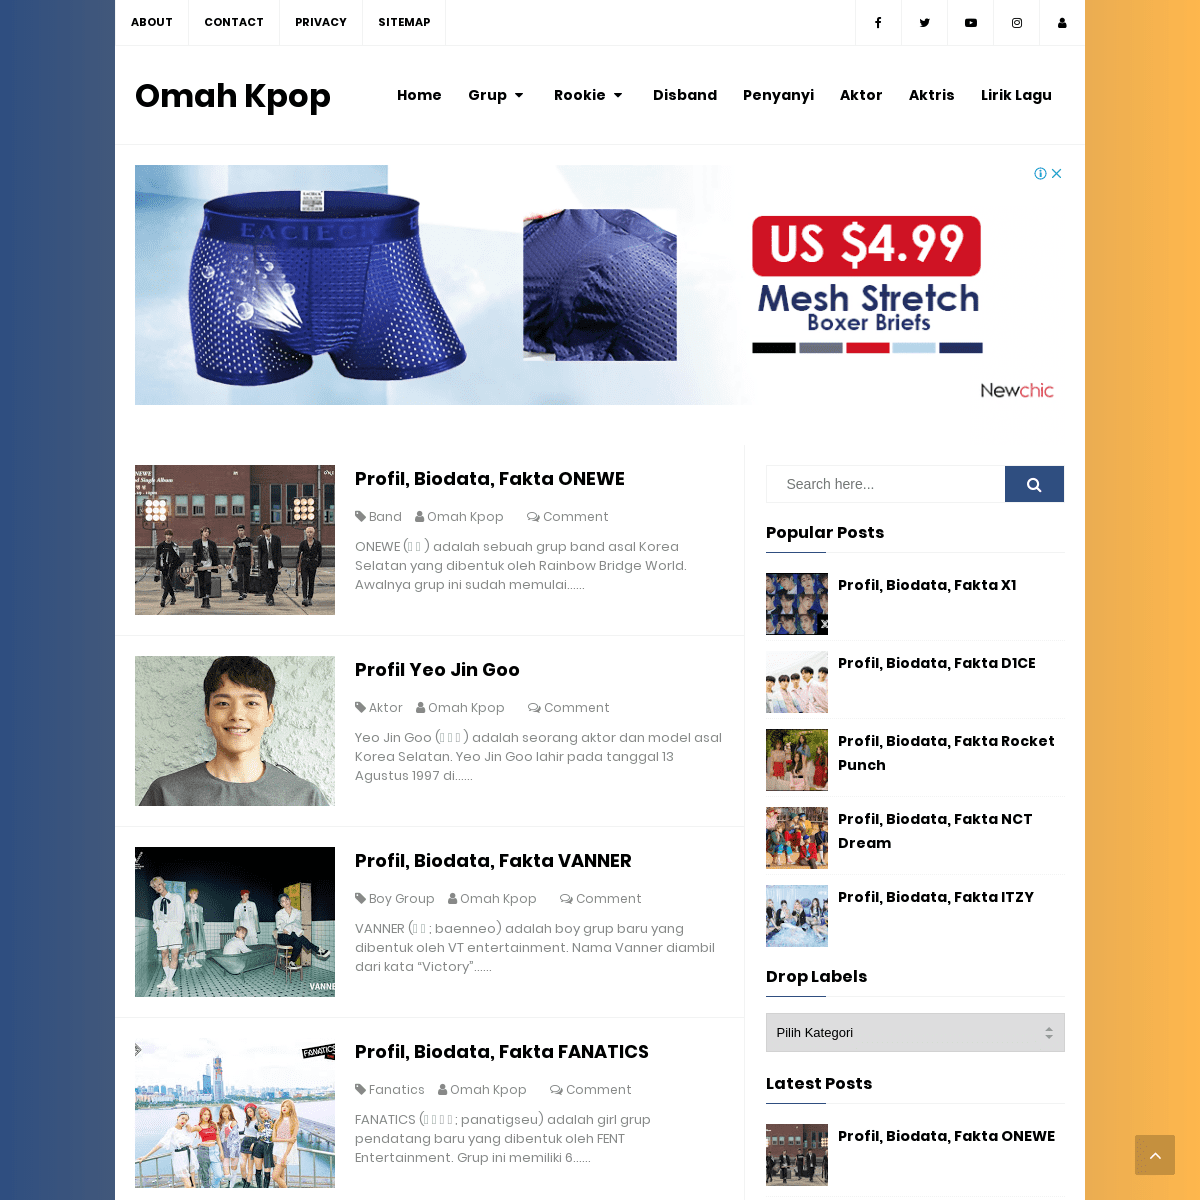 A complete backup of omahkpop.com